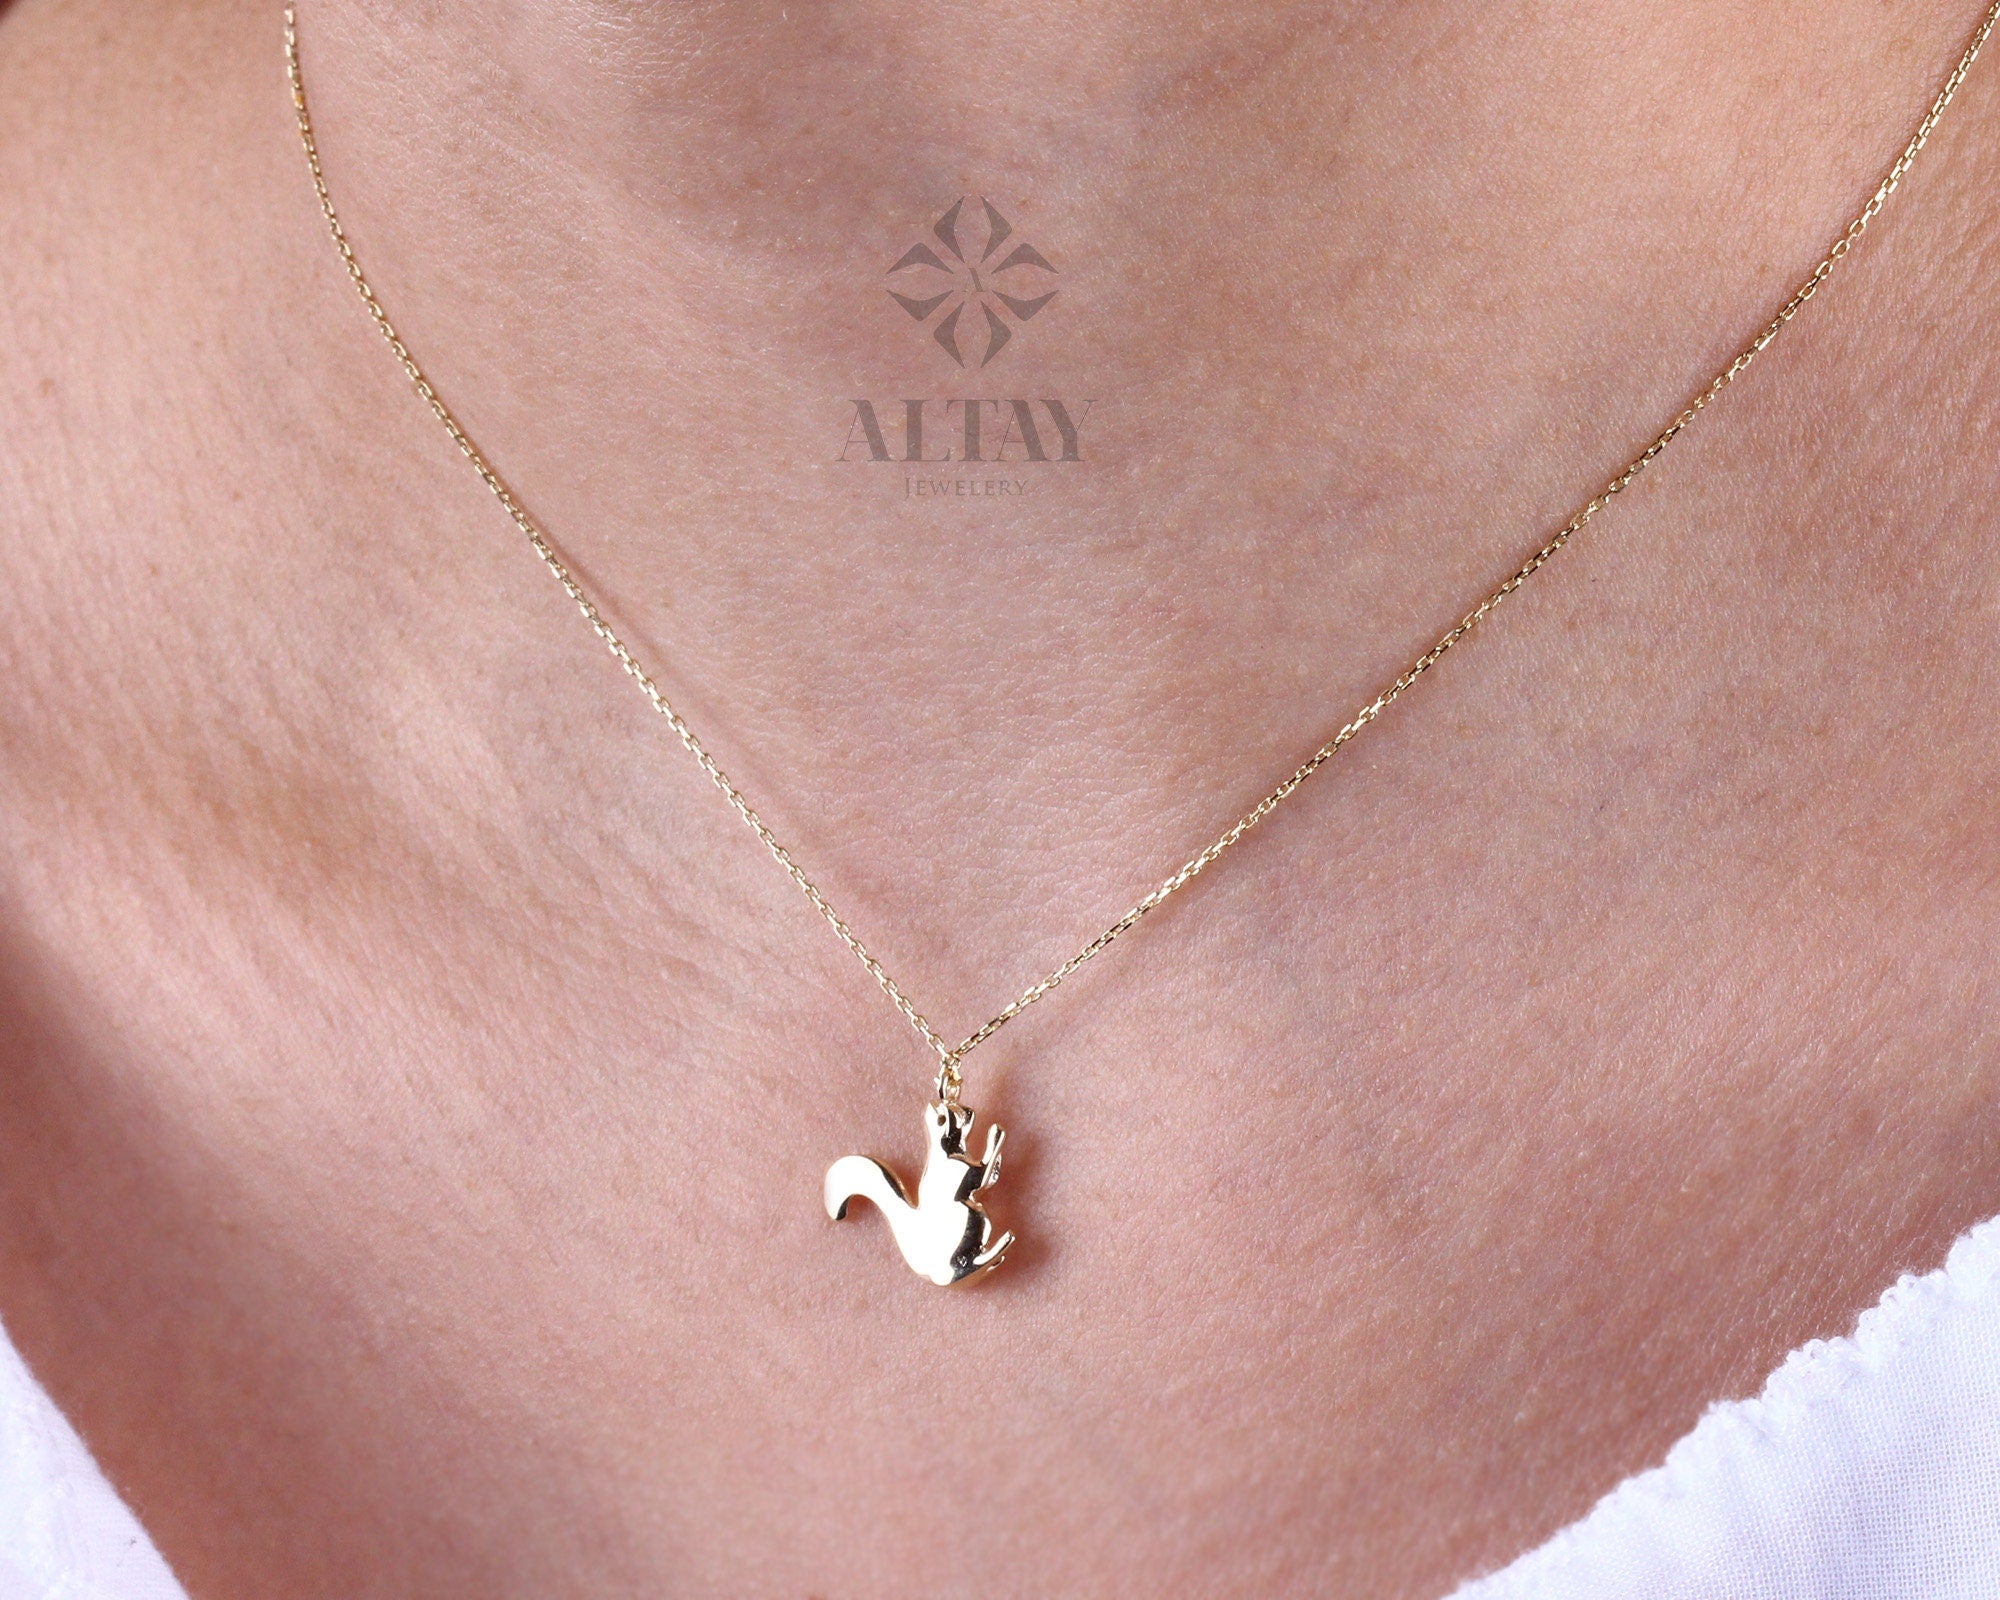 14K Gold Squirrel Necklace, Squirrel Charm Pendant, Good Luck Layering Chain Choker, Animal Pendant, Dainty Gold Charm Jewelry, Gift for Her